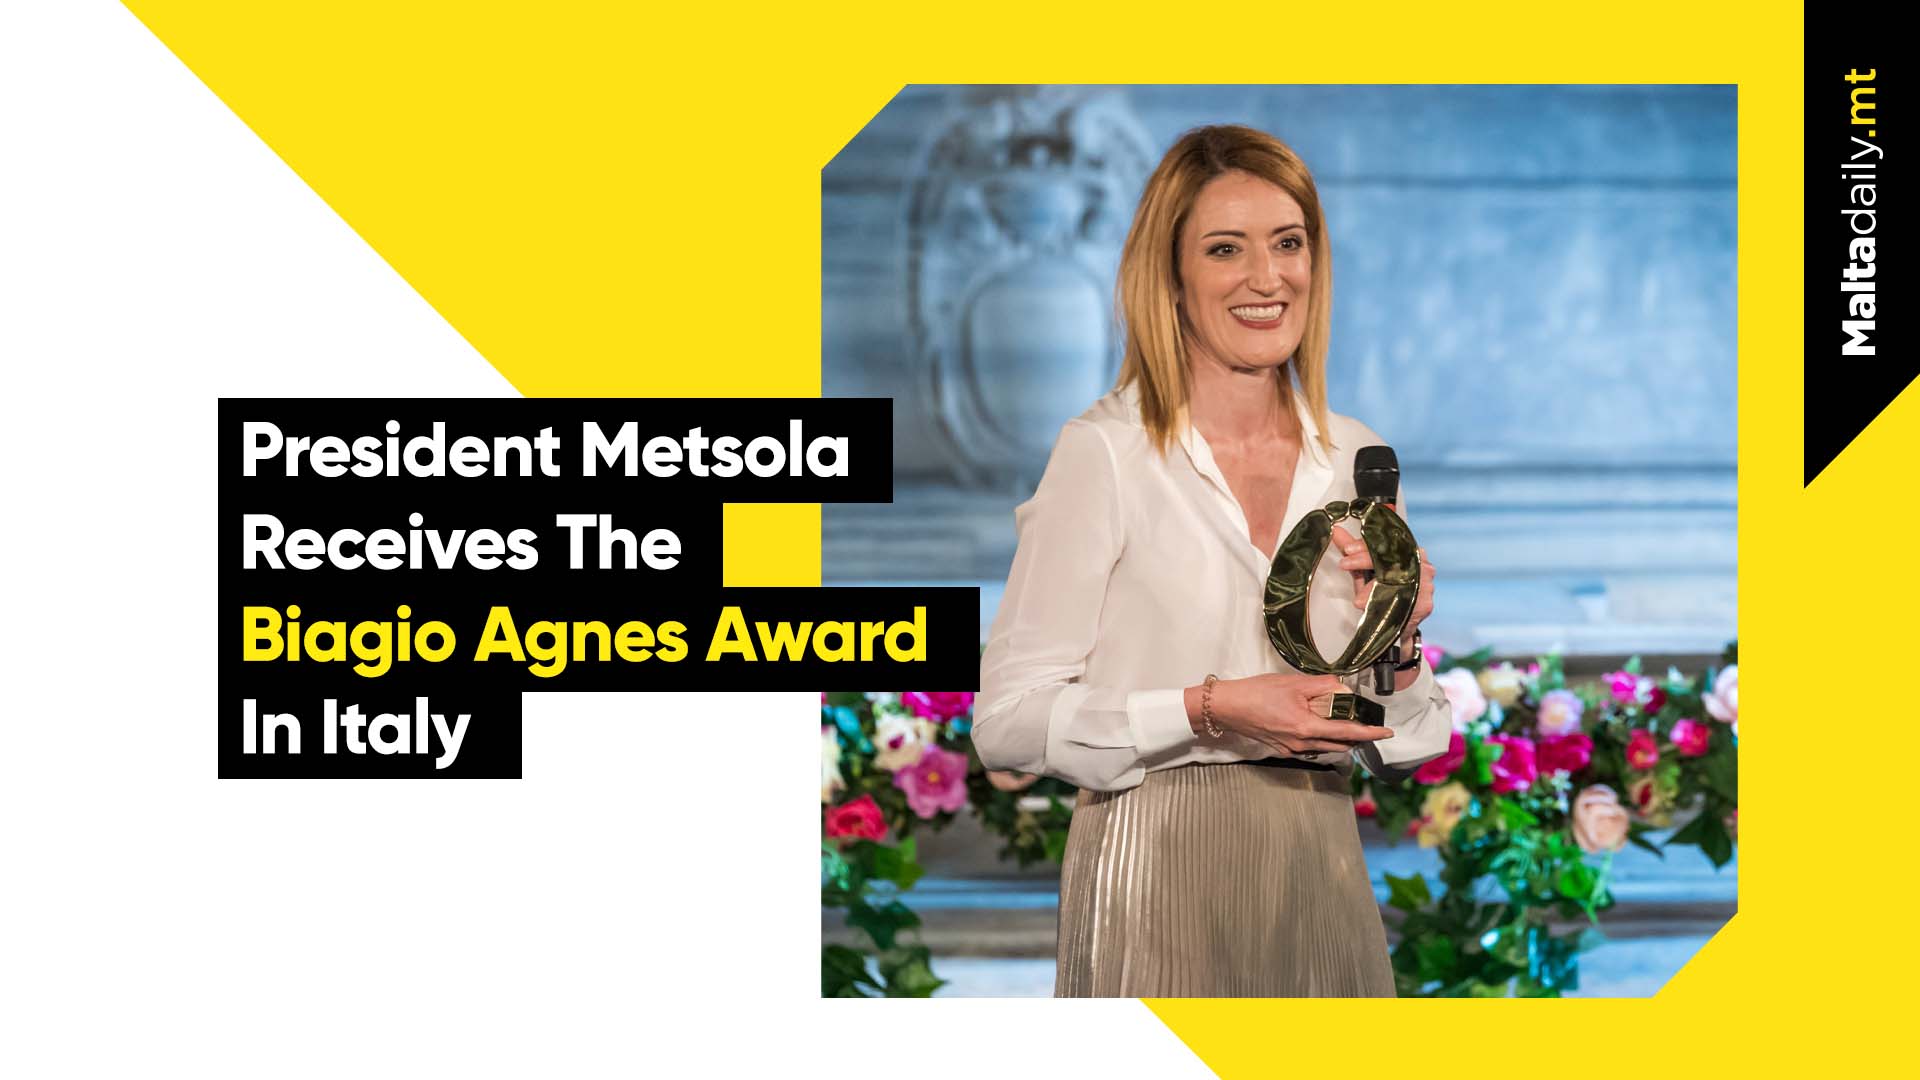 President Metsola Receives The Biagio Agnes Award In Italy